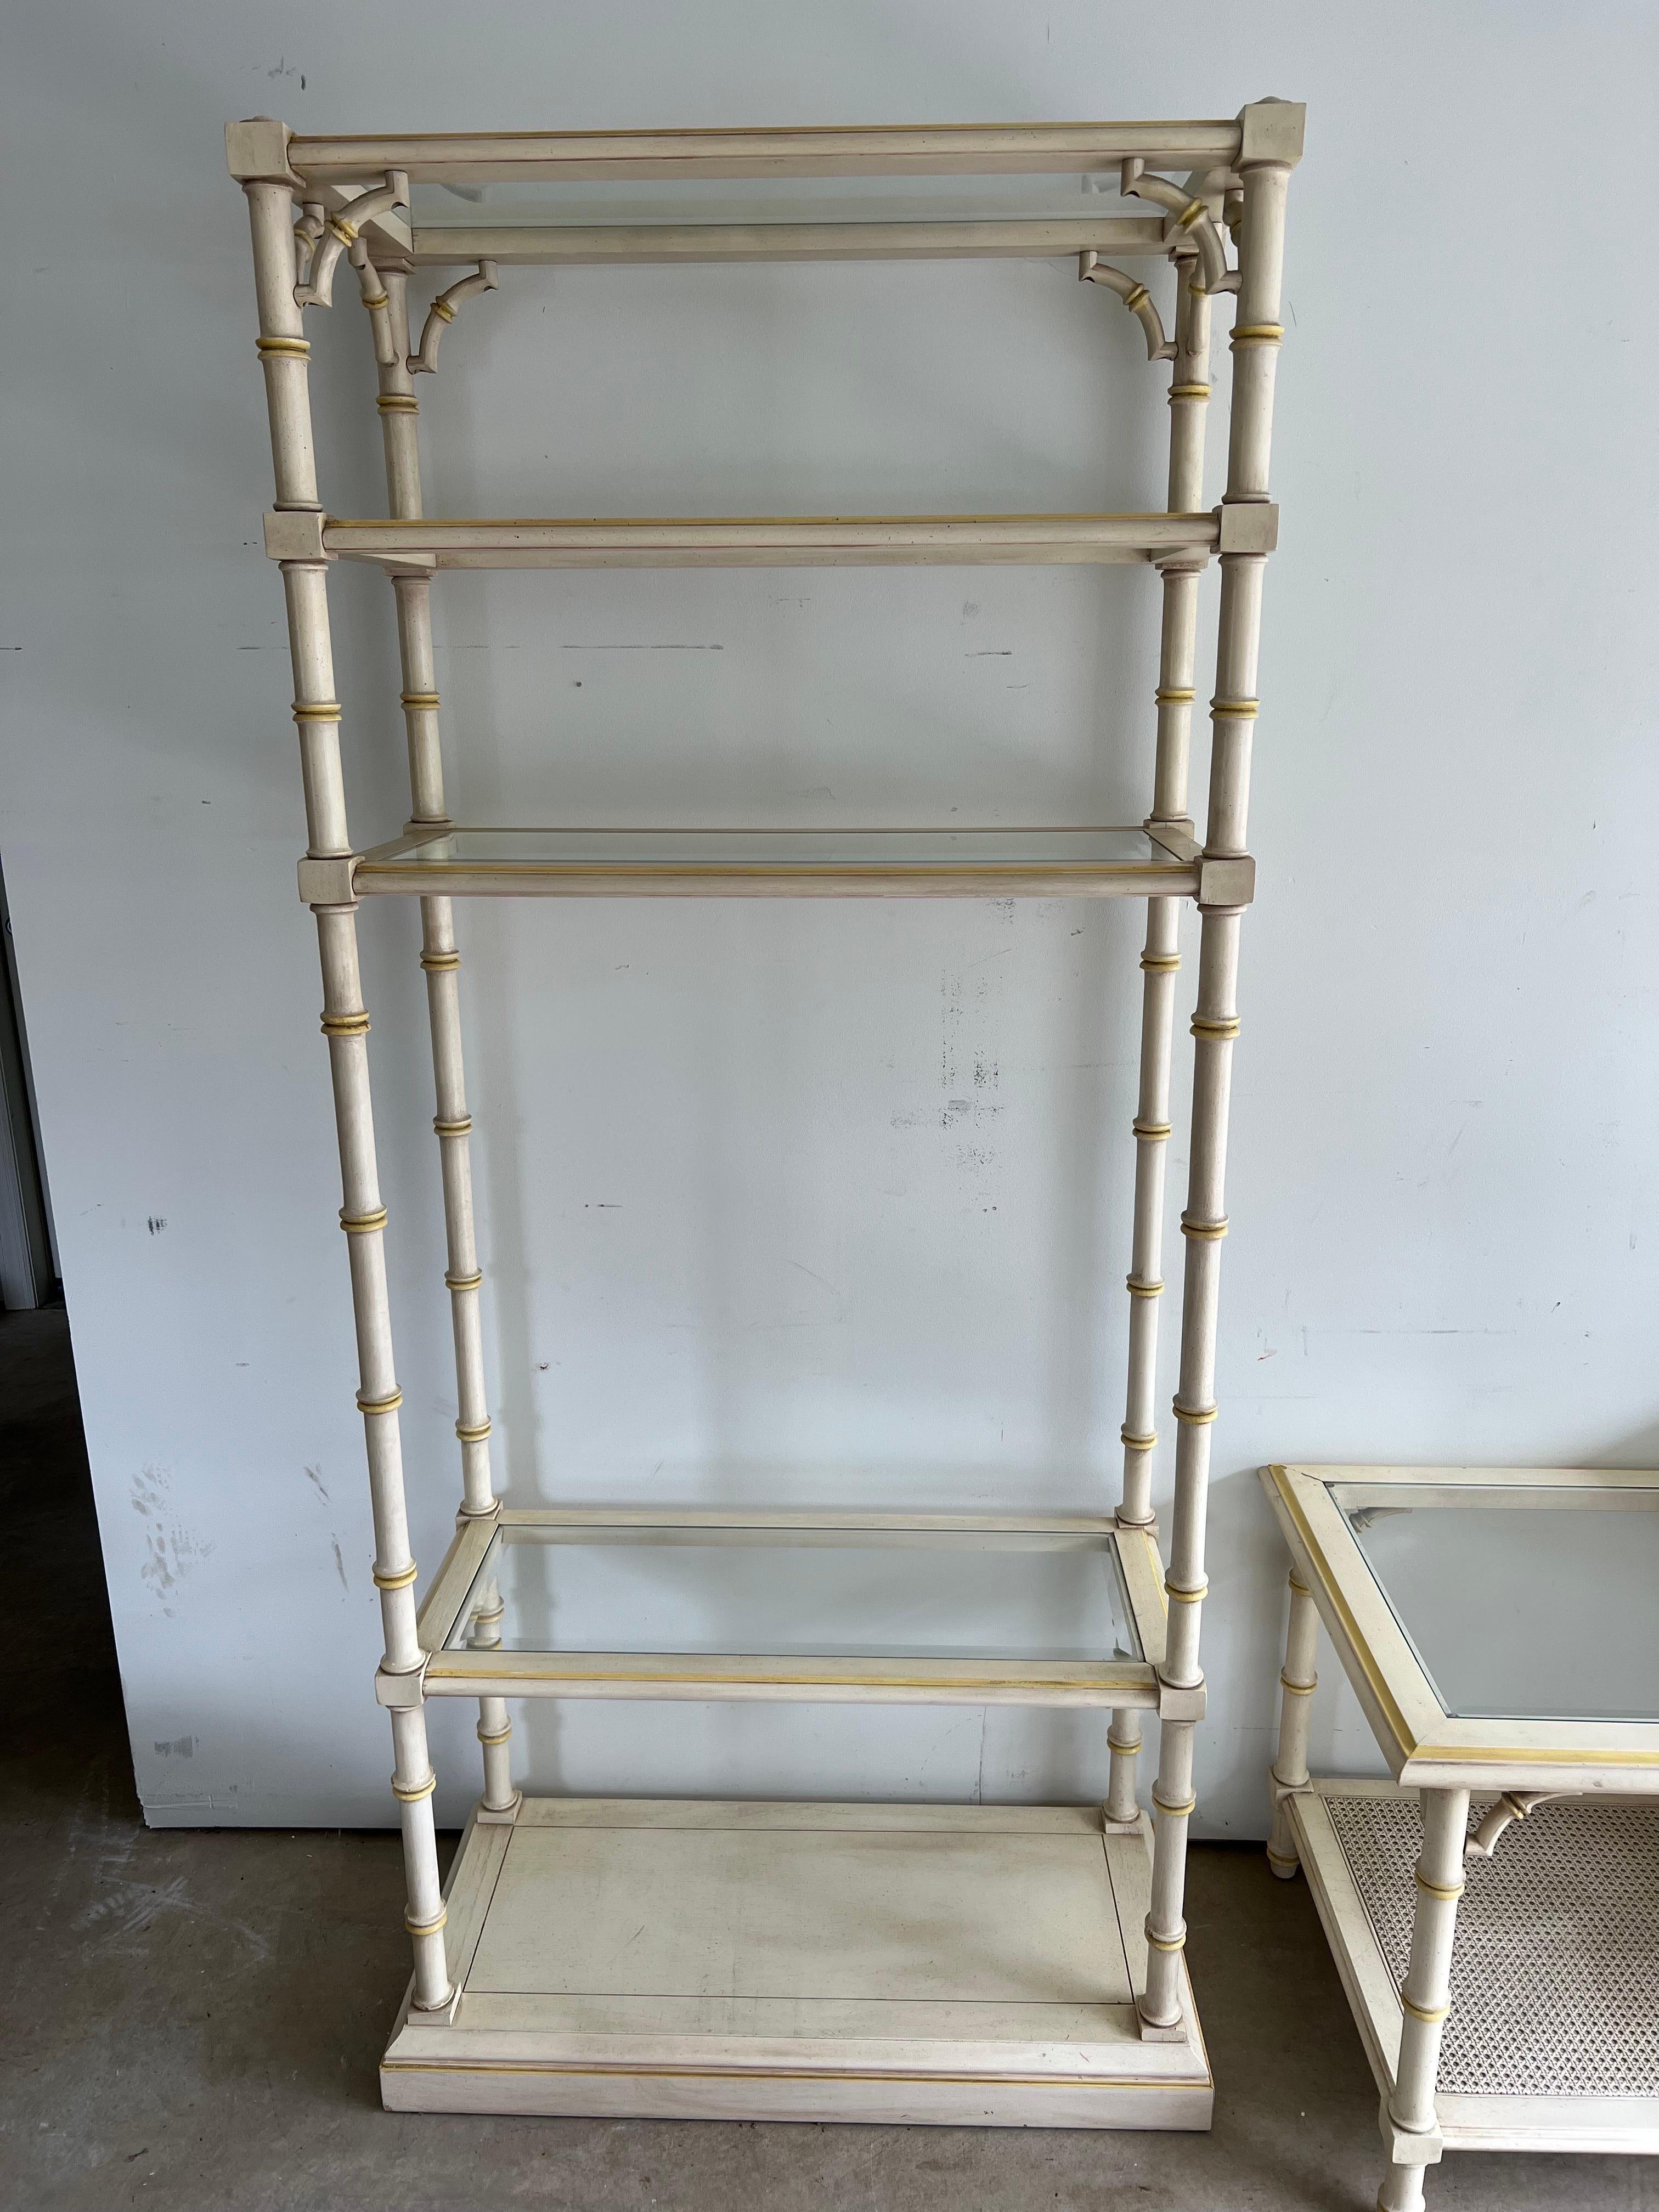 Faux Bamboo Etagere by Lane. 1970's style shelving. A cream colored plaette with soft yellow accent . Great piece for storing books or collectibles .Perfect for that Coastal look or use in an enclosed patio for plants. Matching side table also